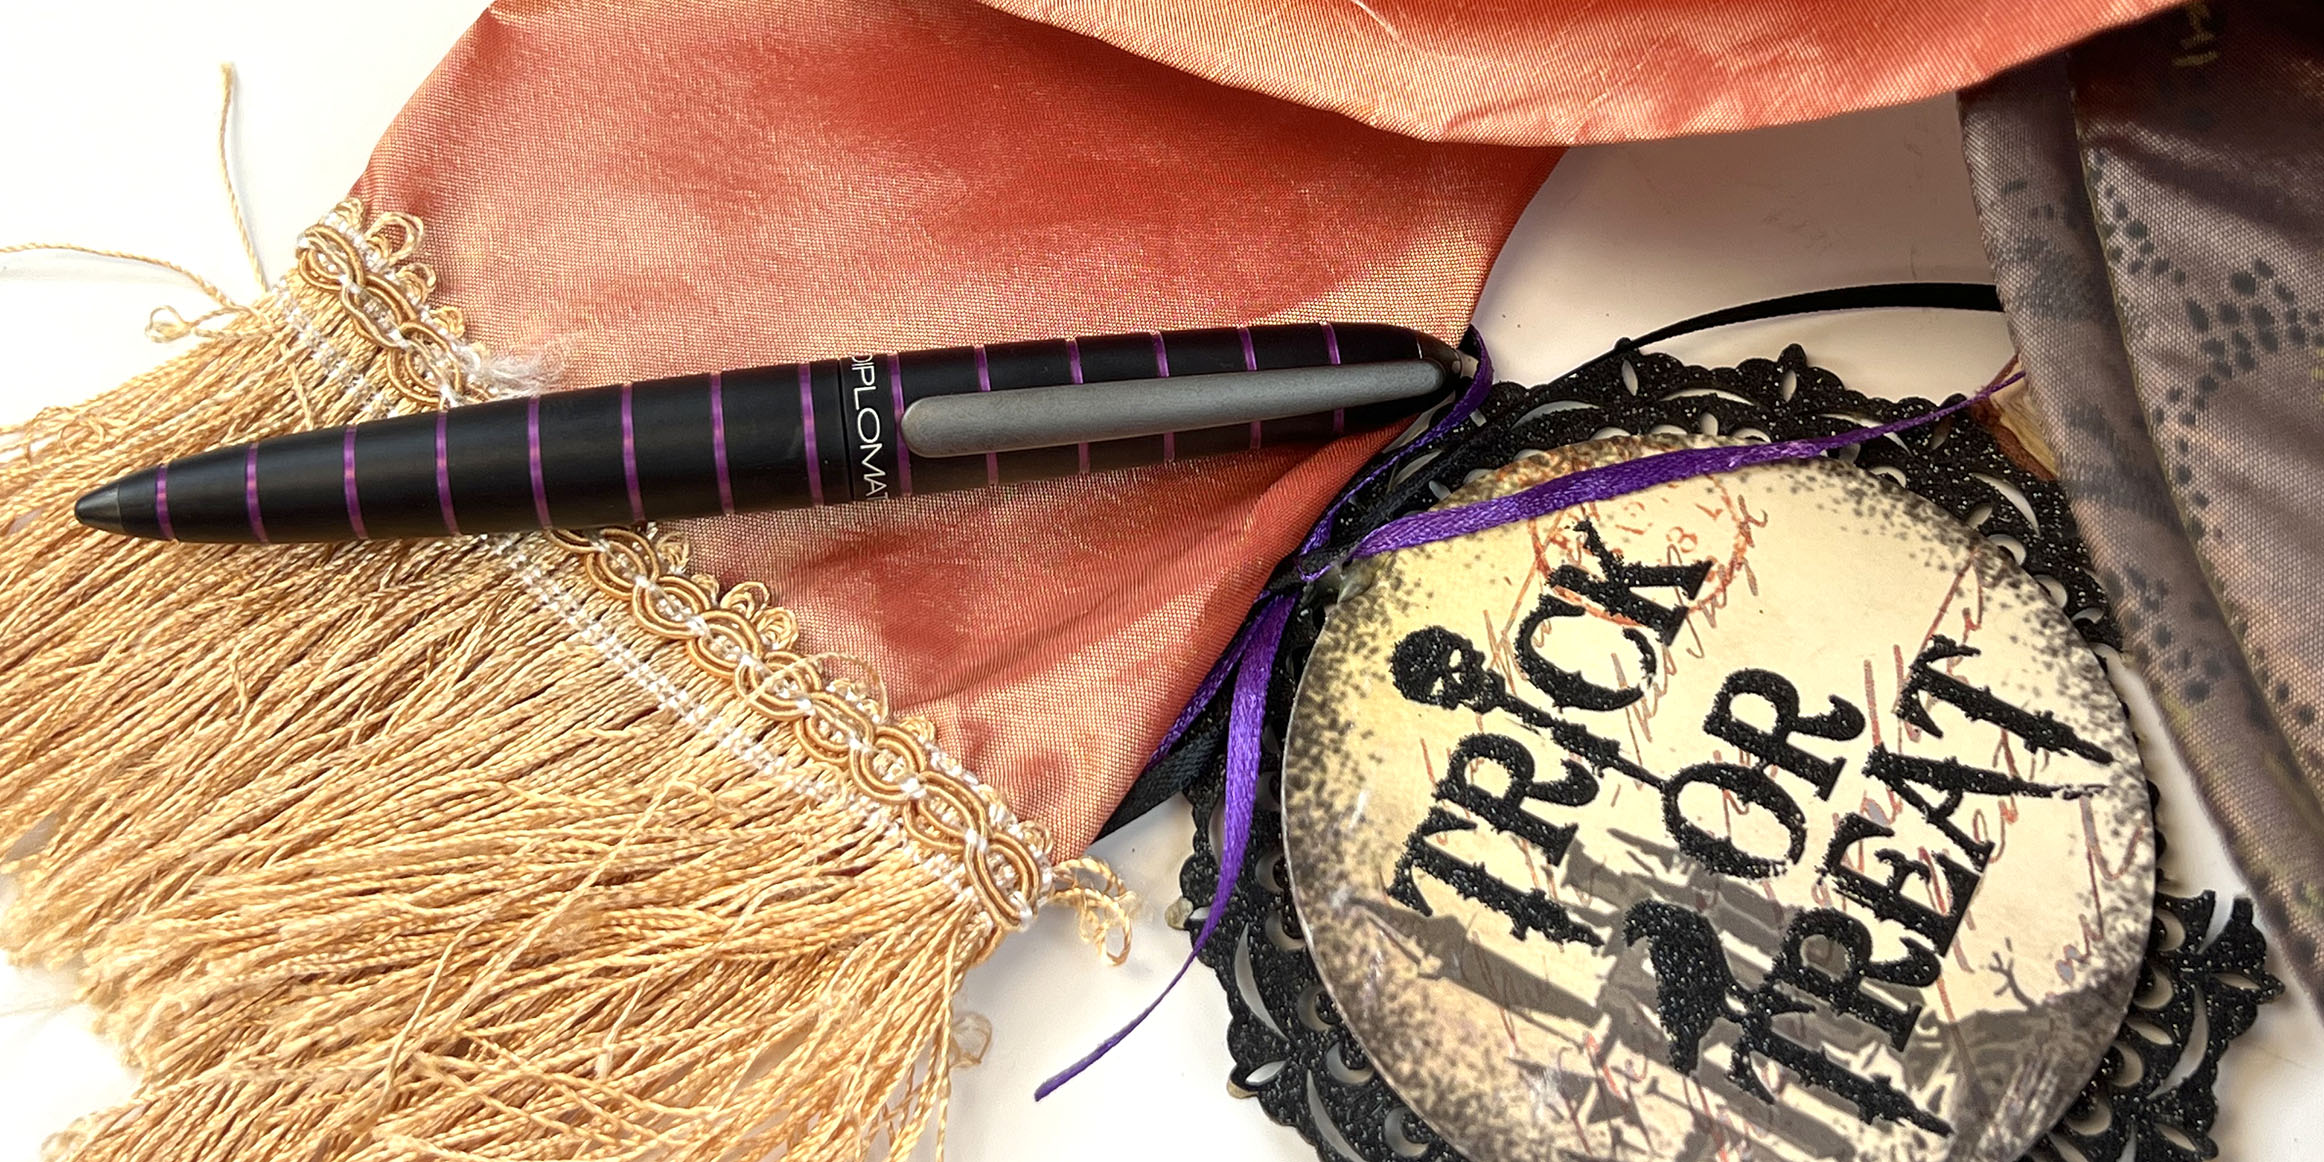 Top 20 Halloween Pens and Inks for 2022: Desktop Magic with these best pens and inks: Diamine, Sailor, Pineider, Diplomat, and Caran D Ache